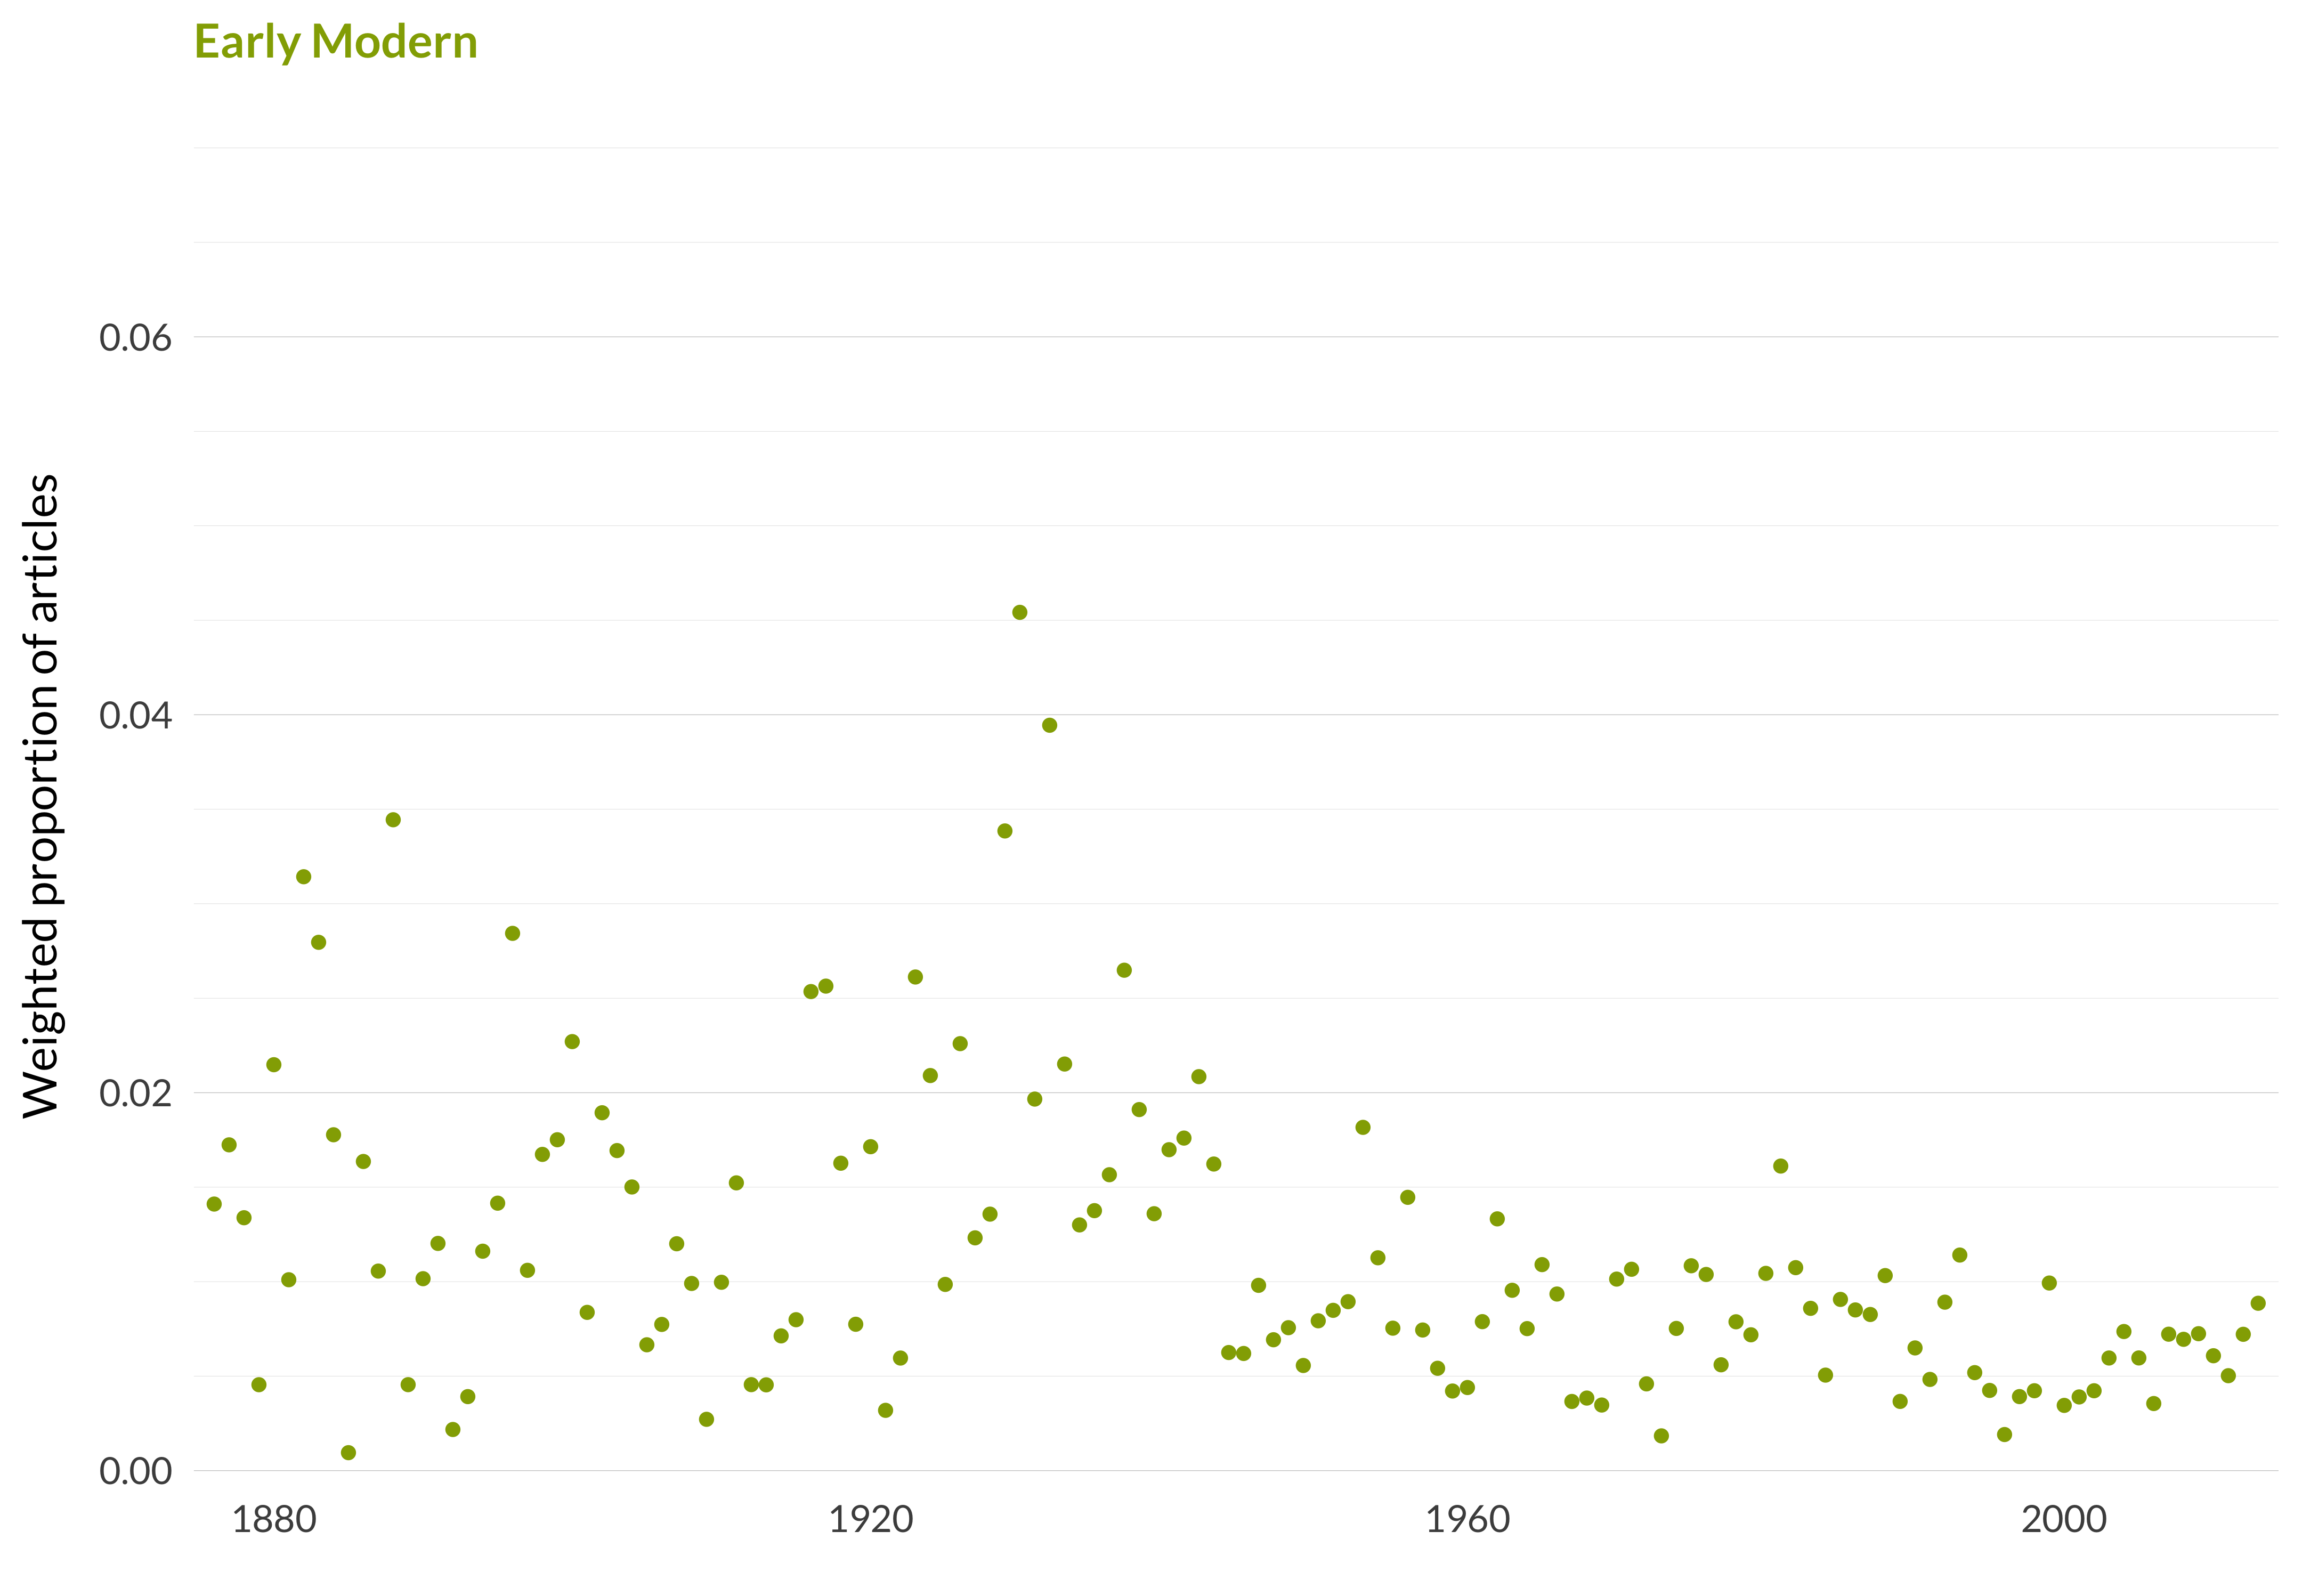 A scatterplot showing which proportion of articles each year are in the early moderntopic. The x-axis shows the year, the y-axis measures the proportion of articles each year in this topic. There is one dot per year. The highest value is in 1930 when 4.5% of articles were in this topic. The lowest value is in 1885 when 0.1% of articles were in this topic. The full table that provides the data for this graph is available in Table A.21 in Appendix A.